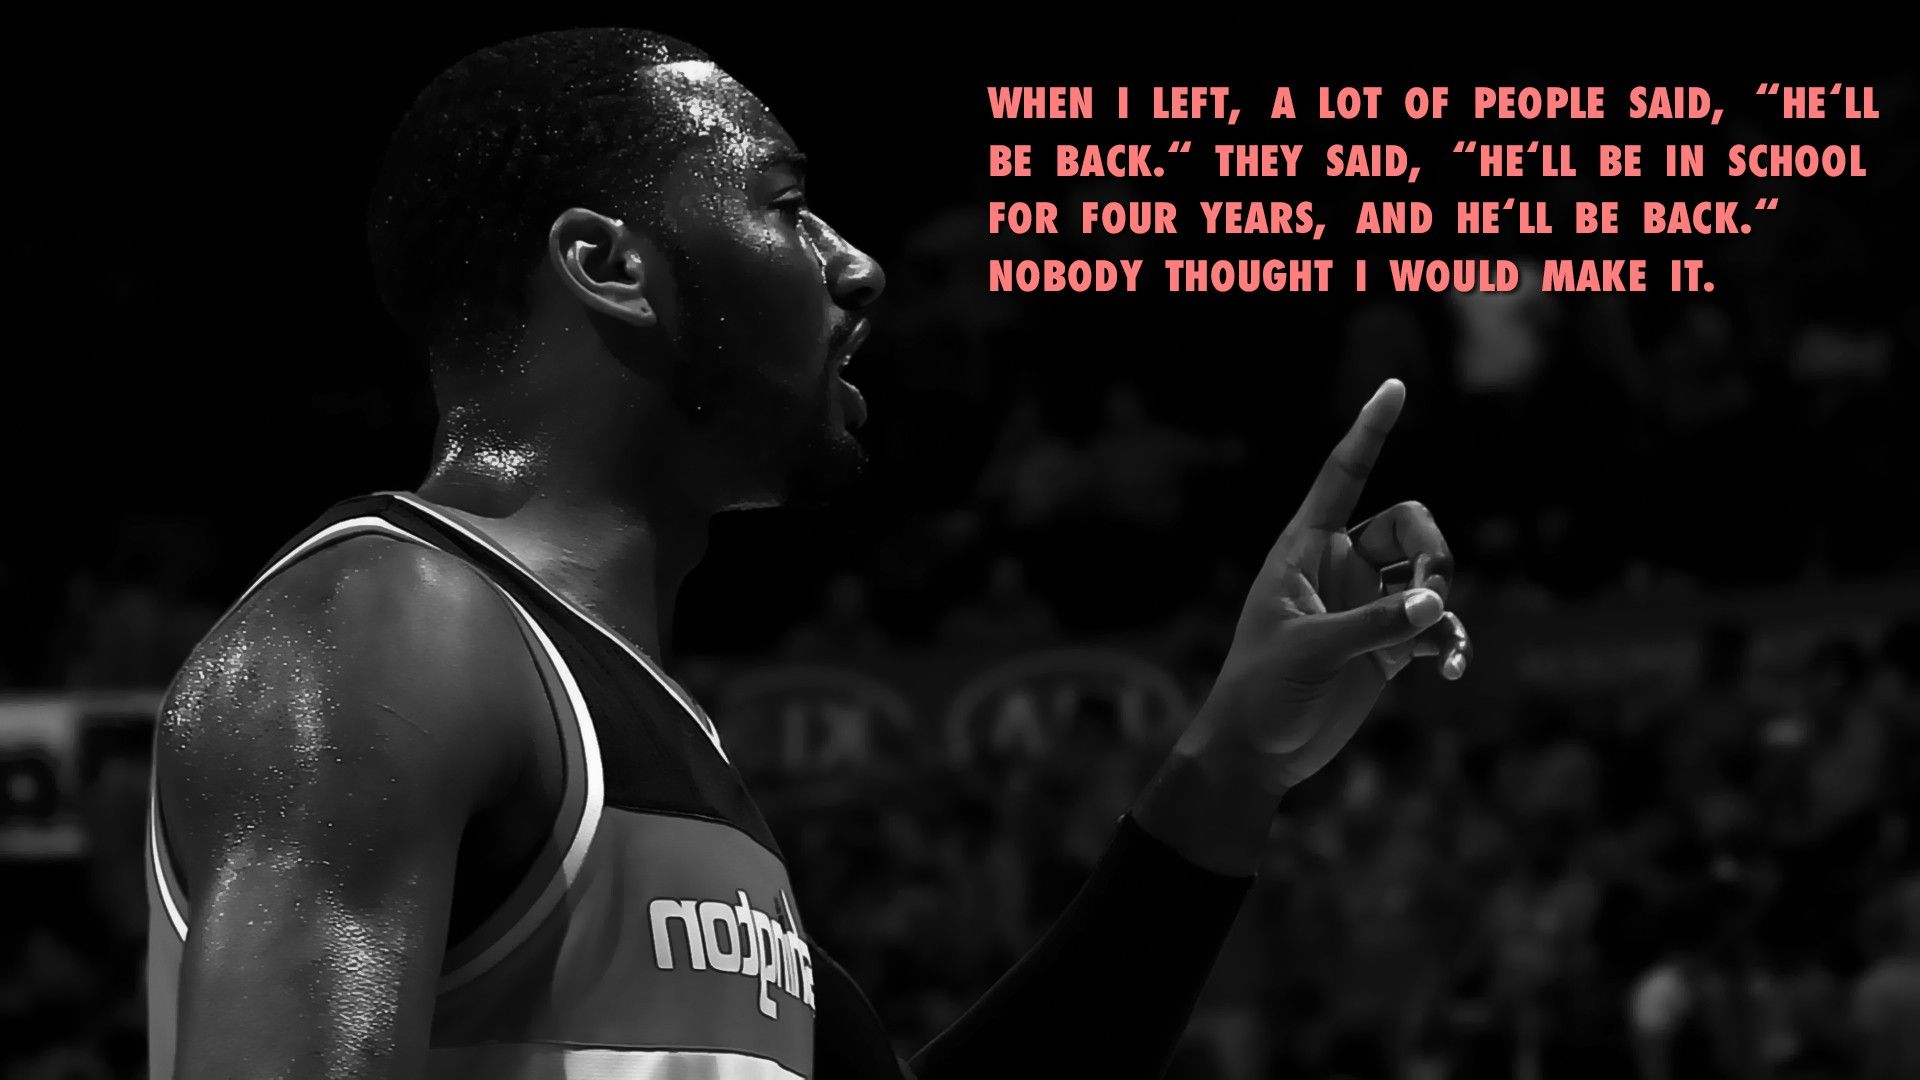 Made Some Desktop Background For R NBA With Player Quotes (1920x1080)